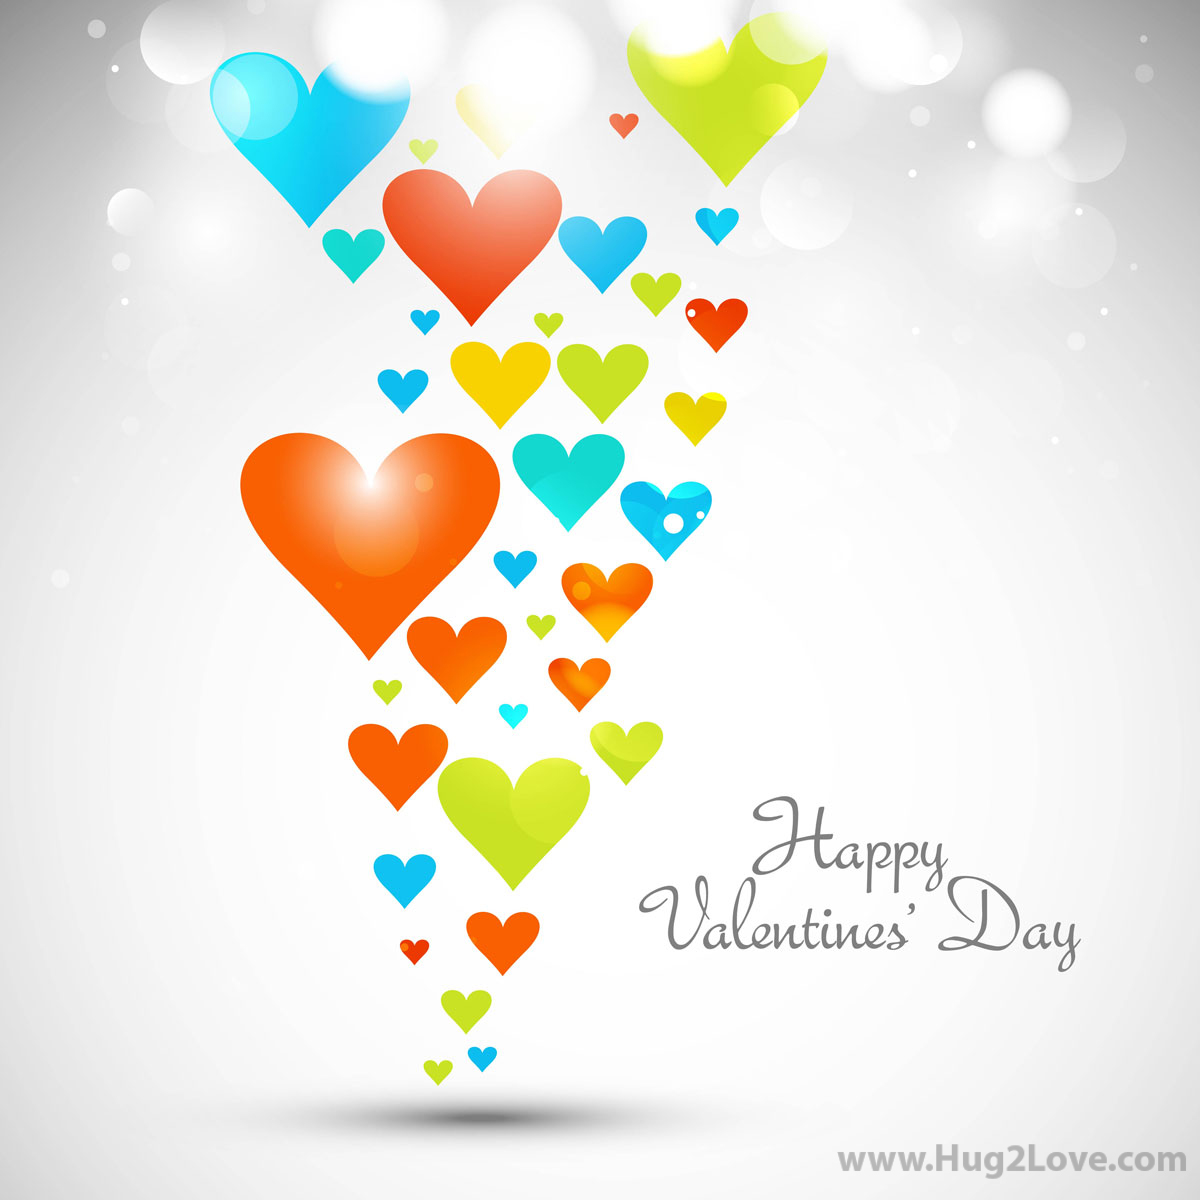 100 Happy Valentine's Day Images & Wallpapers 2023